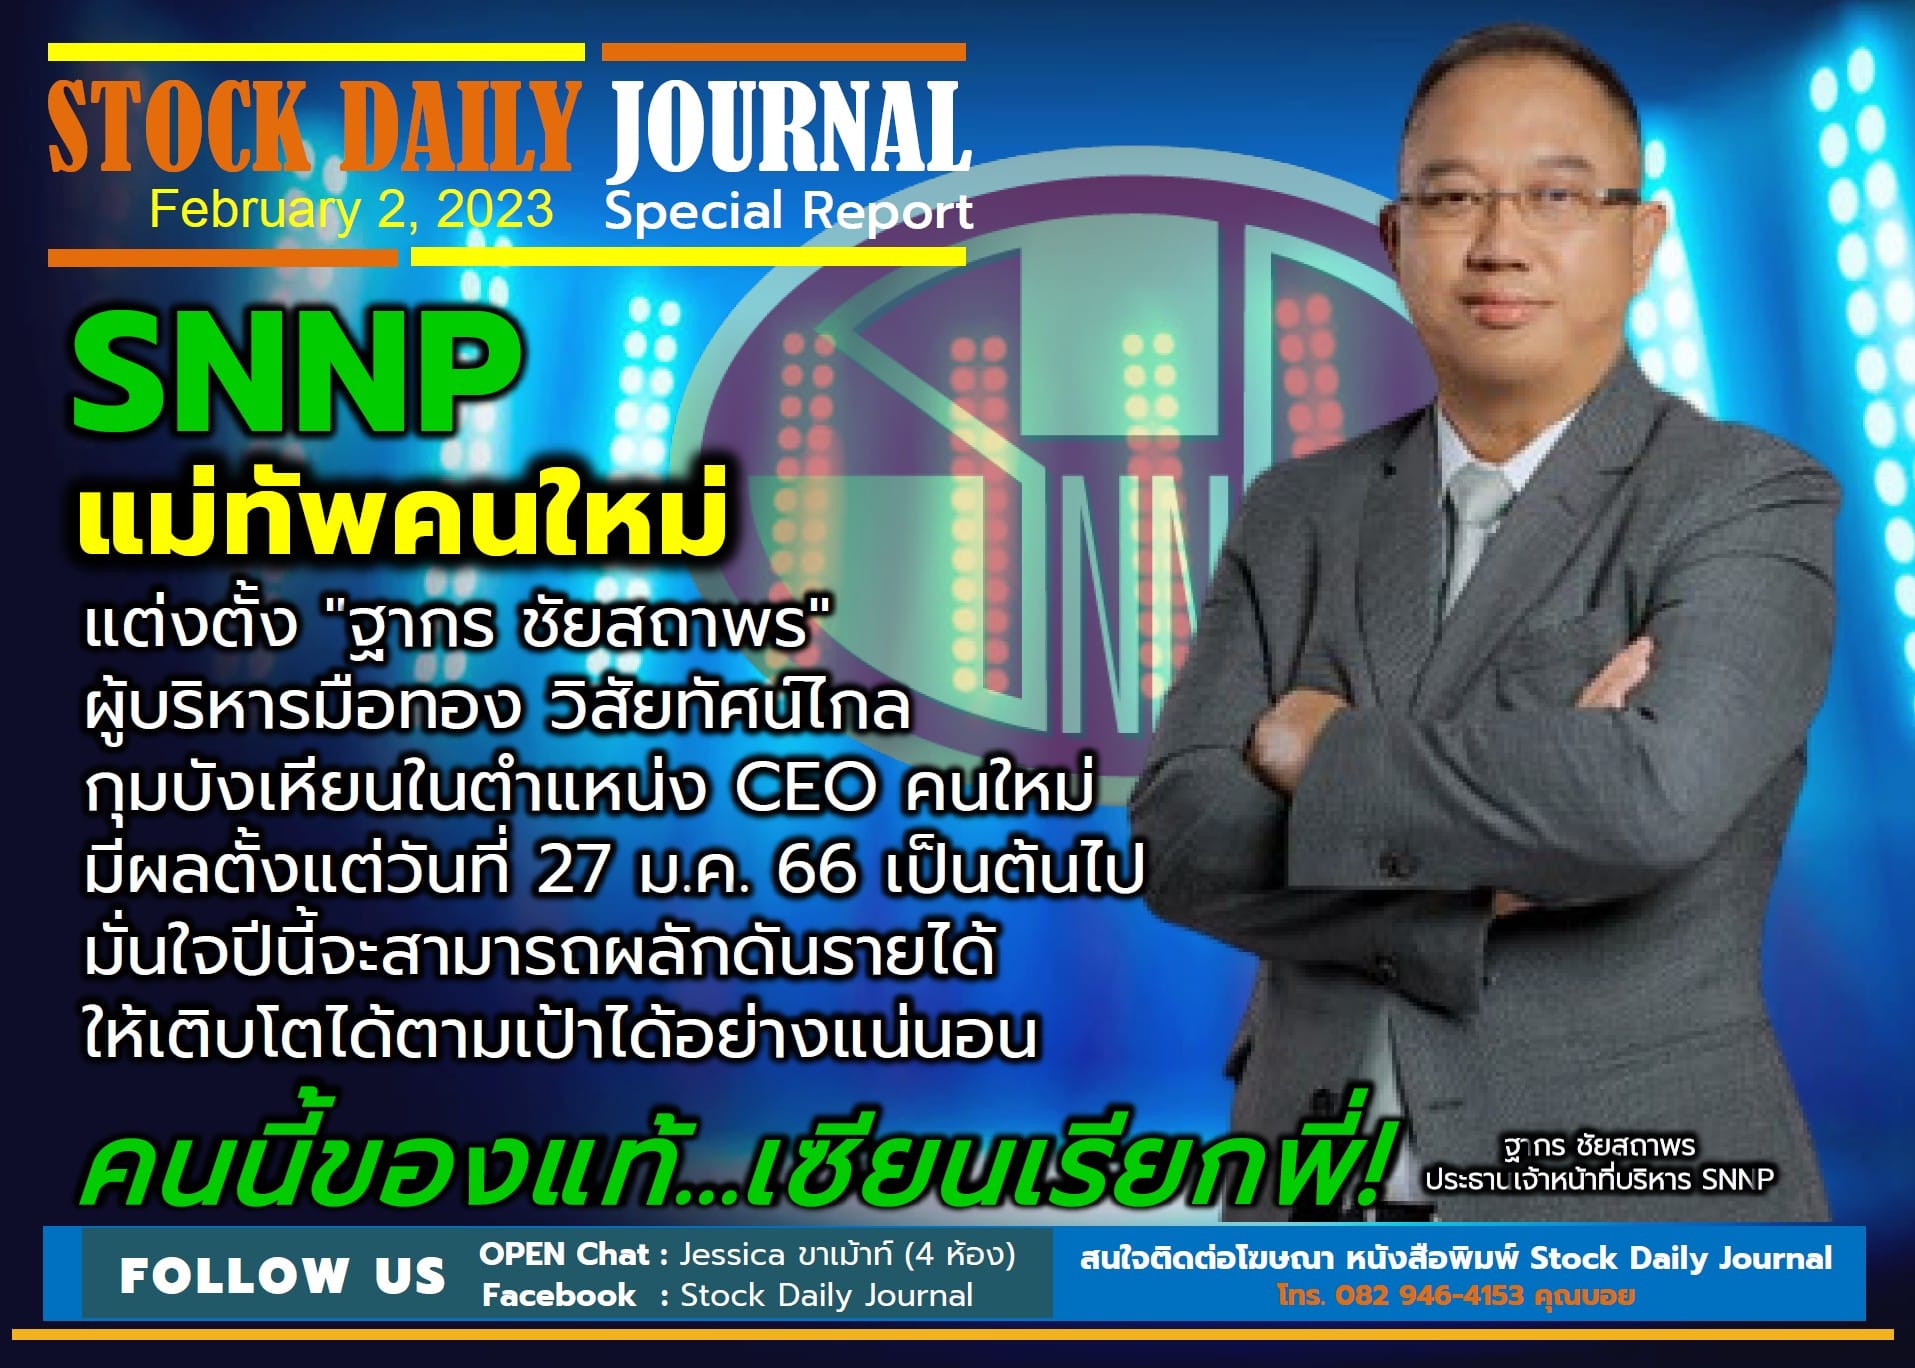 STOCK DAILY JOURNAL “Special Report : SNNP”